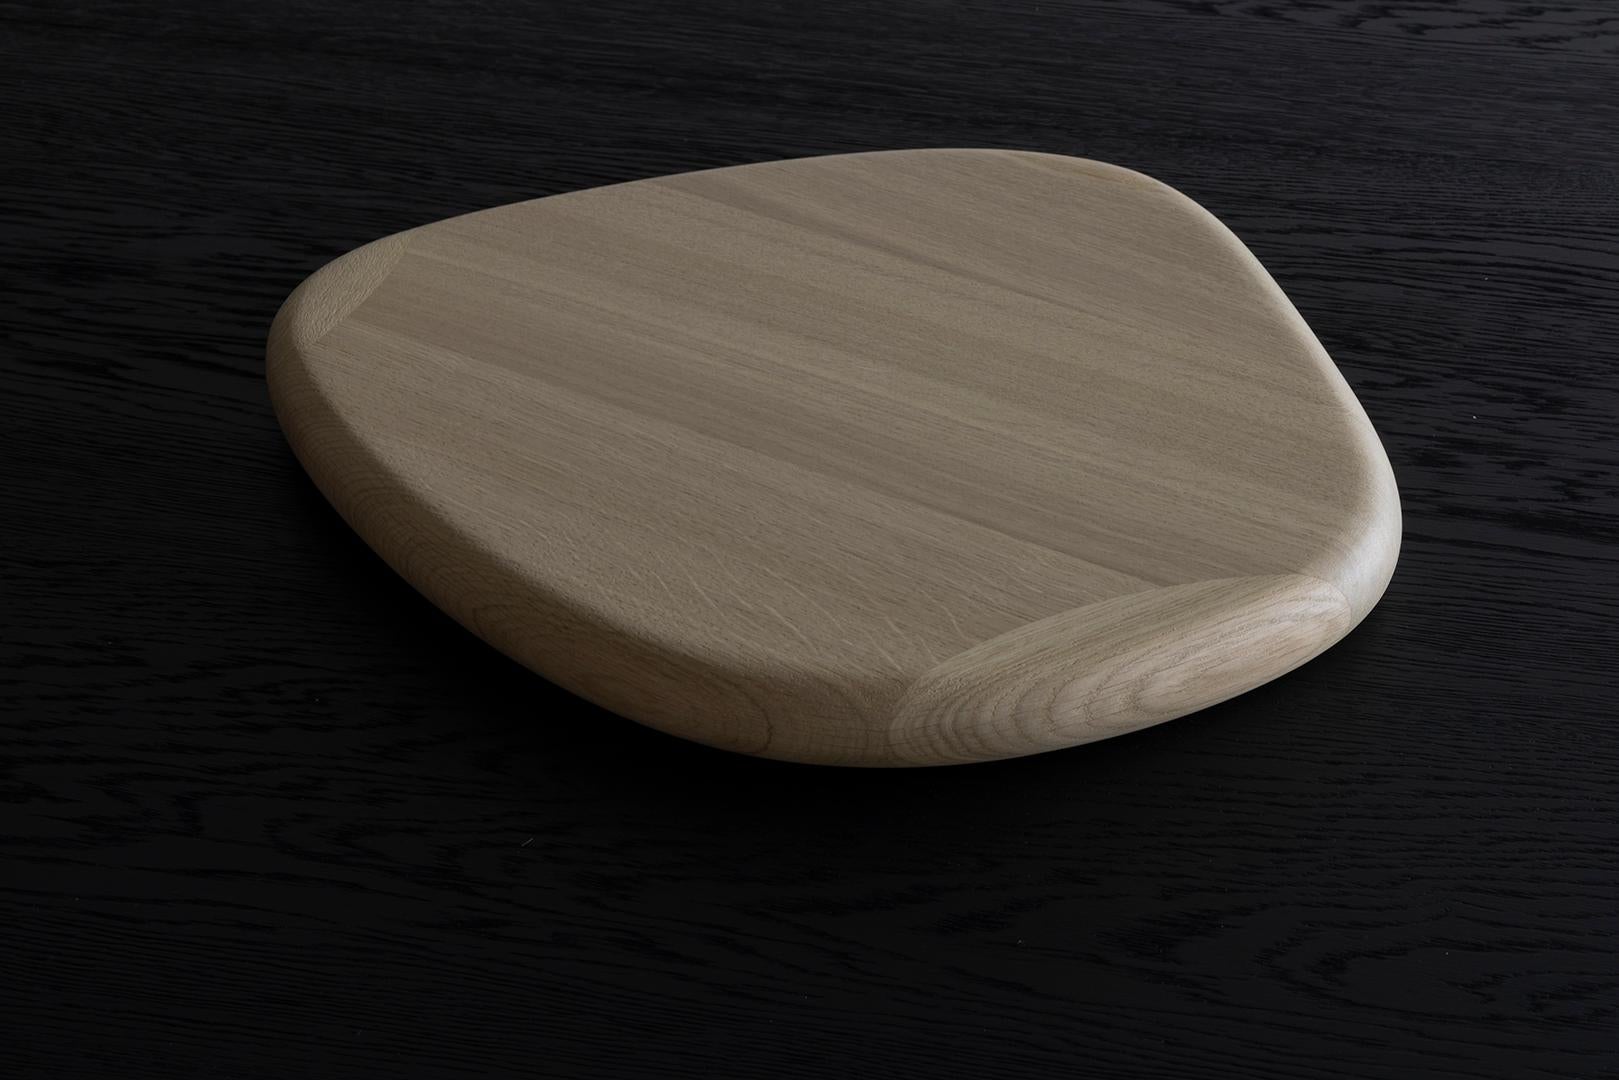 Naan Salver by Van Rossum
Dimensions: D 50 x W 48 x H 4 cm
Materials: Oak


For over 40 years, Van Rossum has designed and handmade solid and sustainable furniture from the workshop in Bergharen, the Netherlands. Exquisite craftsmanship, imaginative